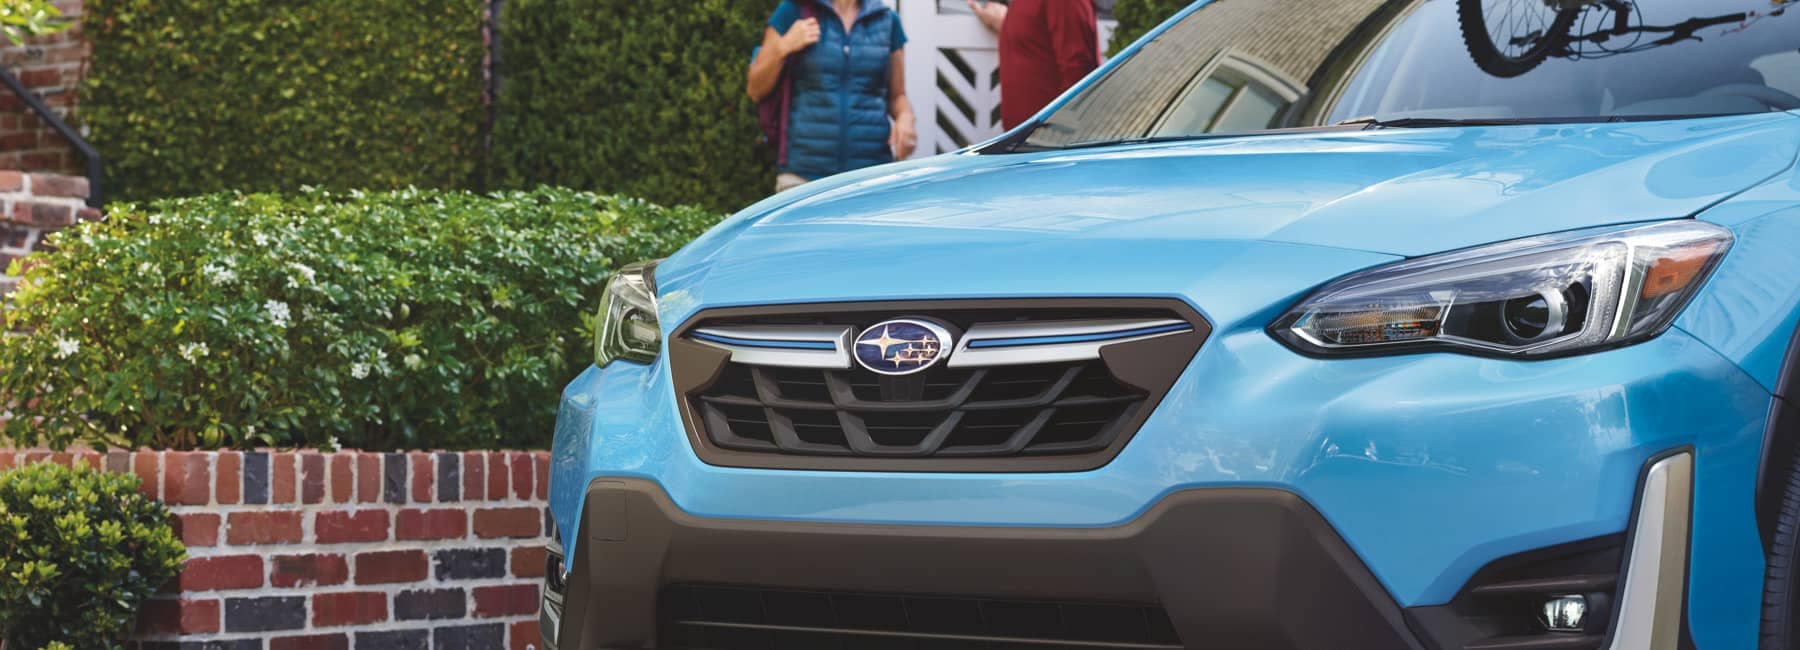 2022 Subaru Crosstrek Hybrid with bicycles mounted on top and parked in front of brick house